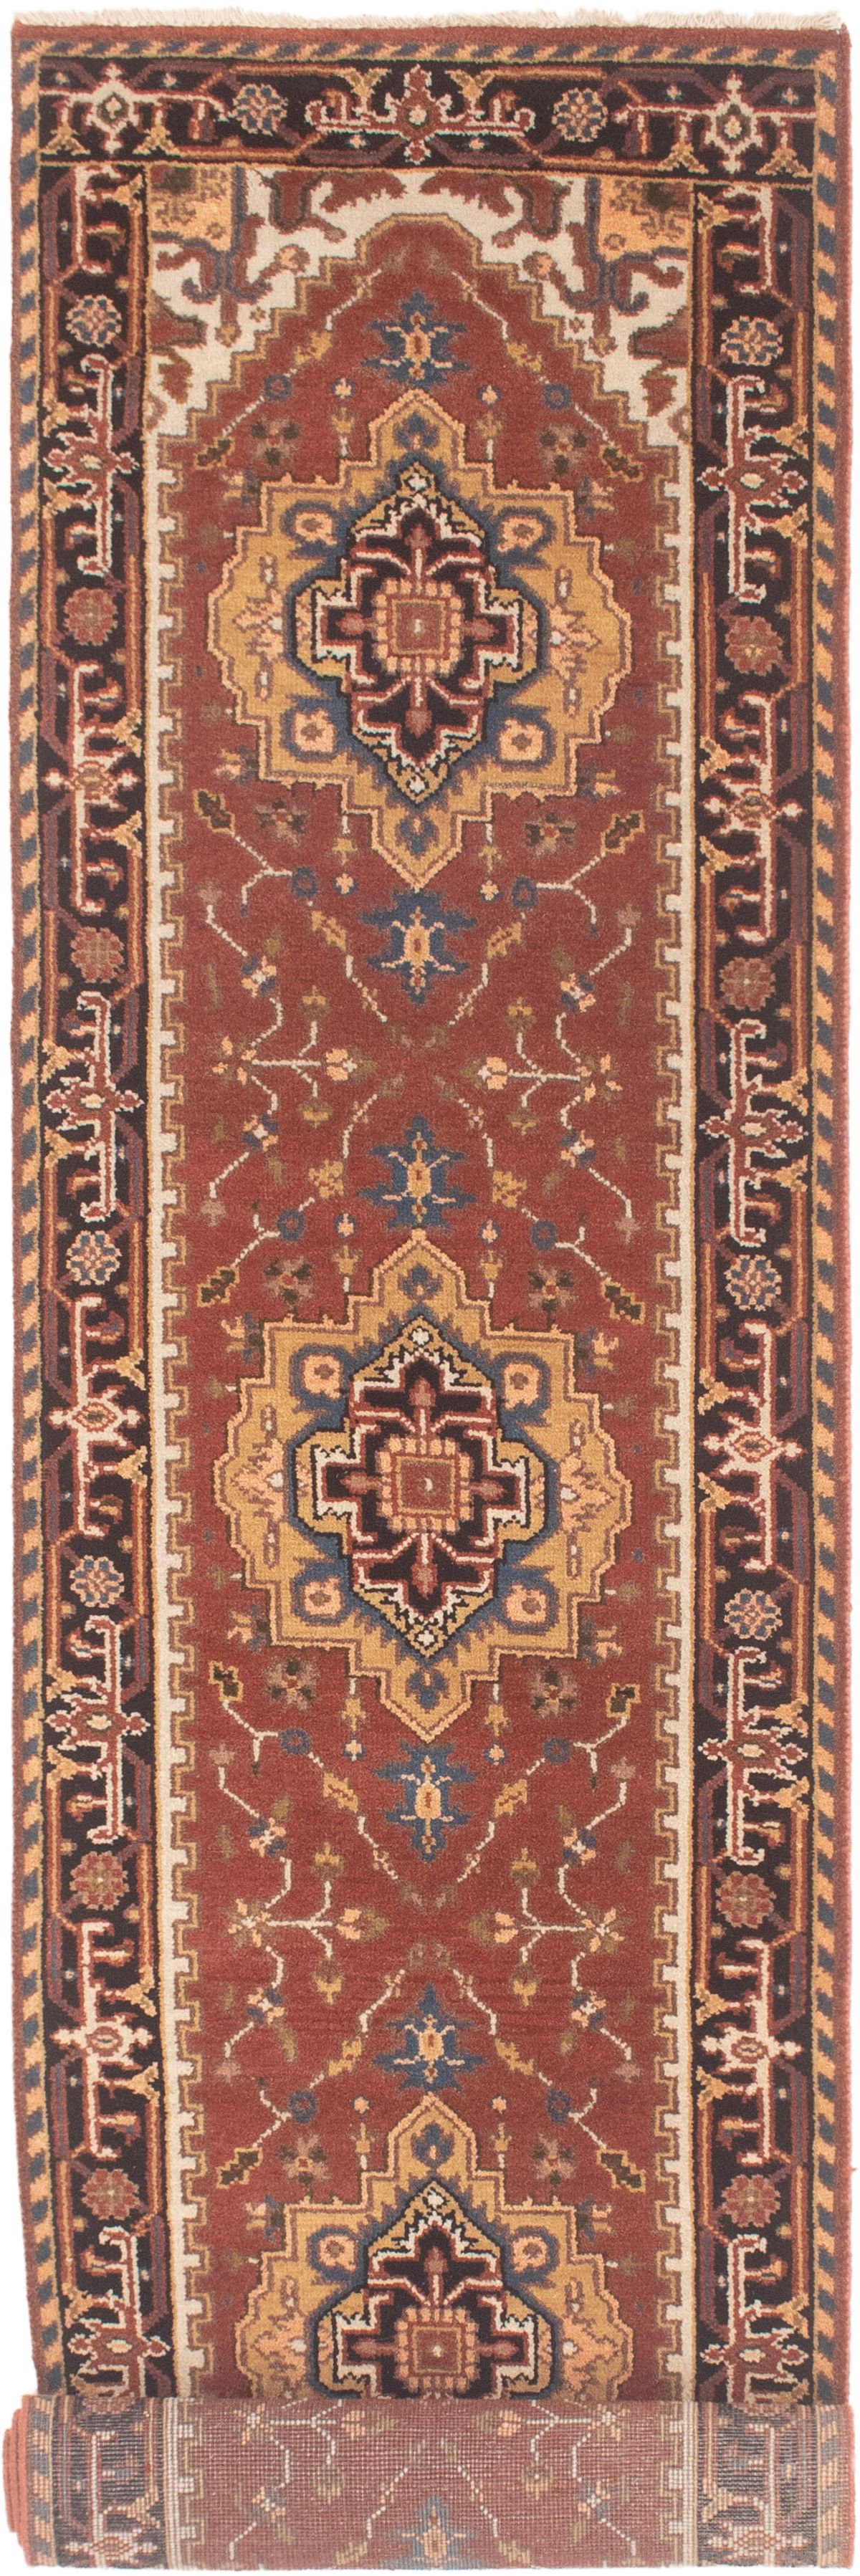 Hand-knotted Serapi Heritage Dark Copper Wool Rug 2'7" x 12'3"  Size: 2'7" x 12'3"  